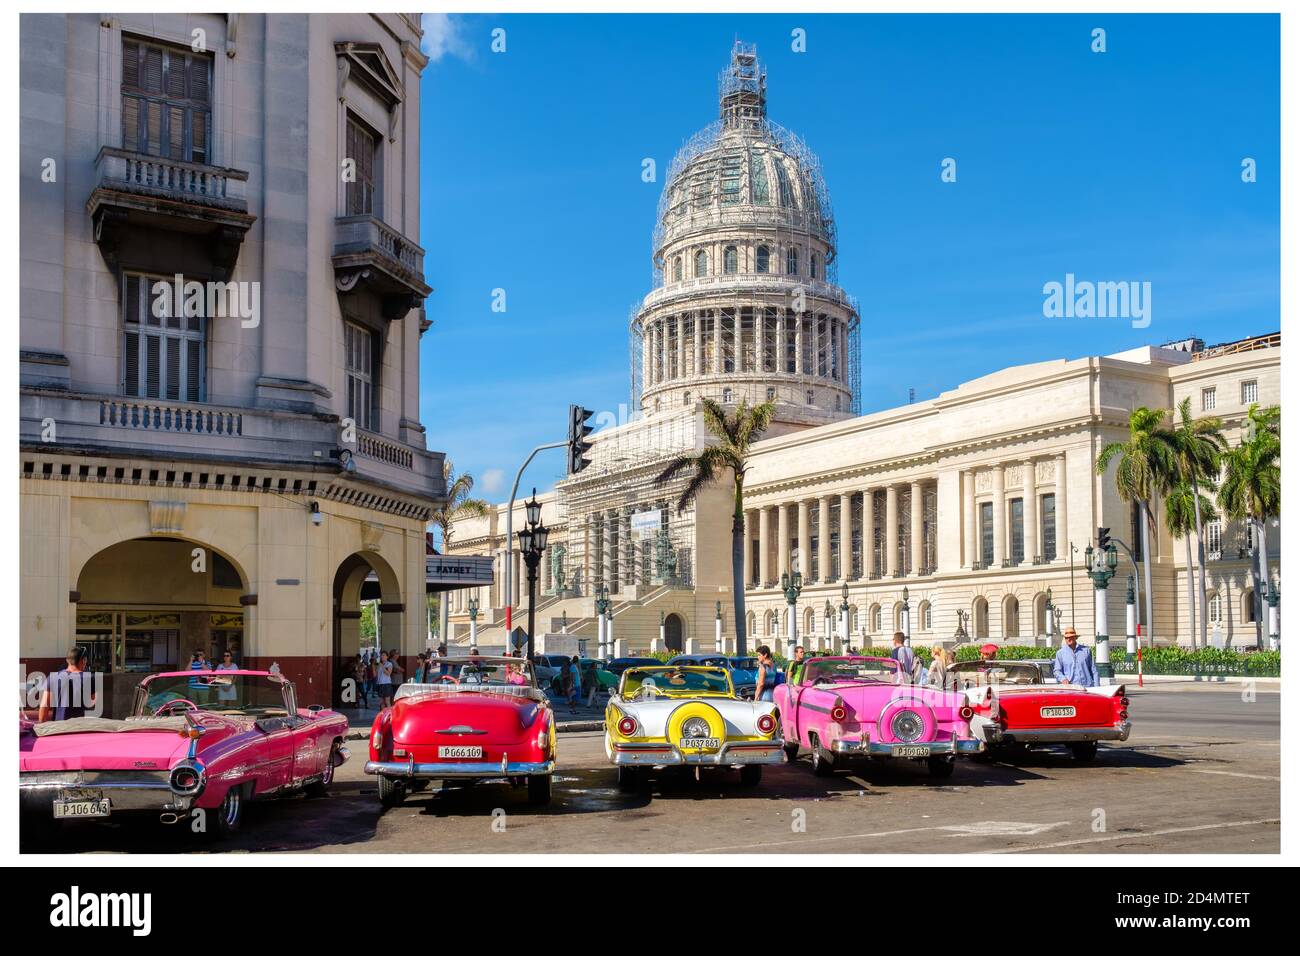 Group of colorful old classic cars near the Capitol in Old Havana Stock Photo